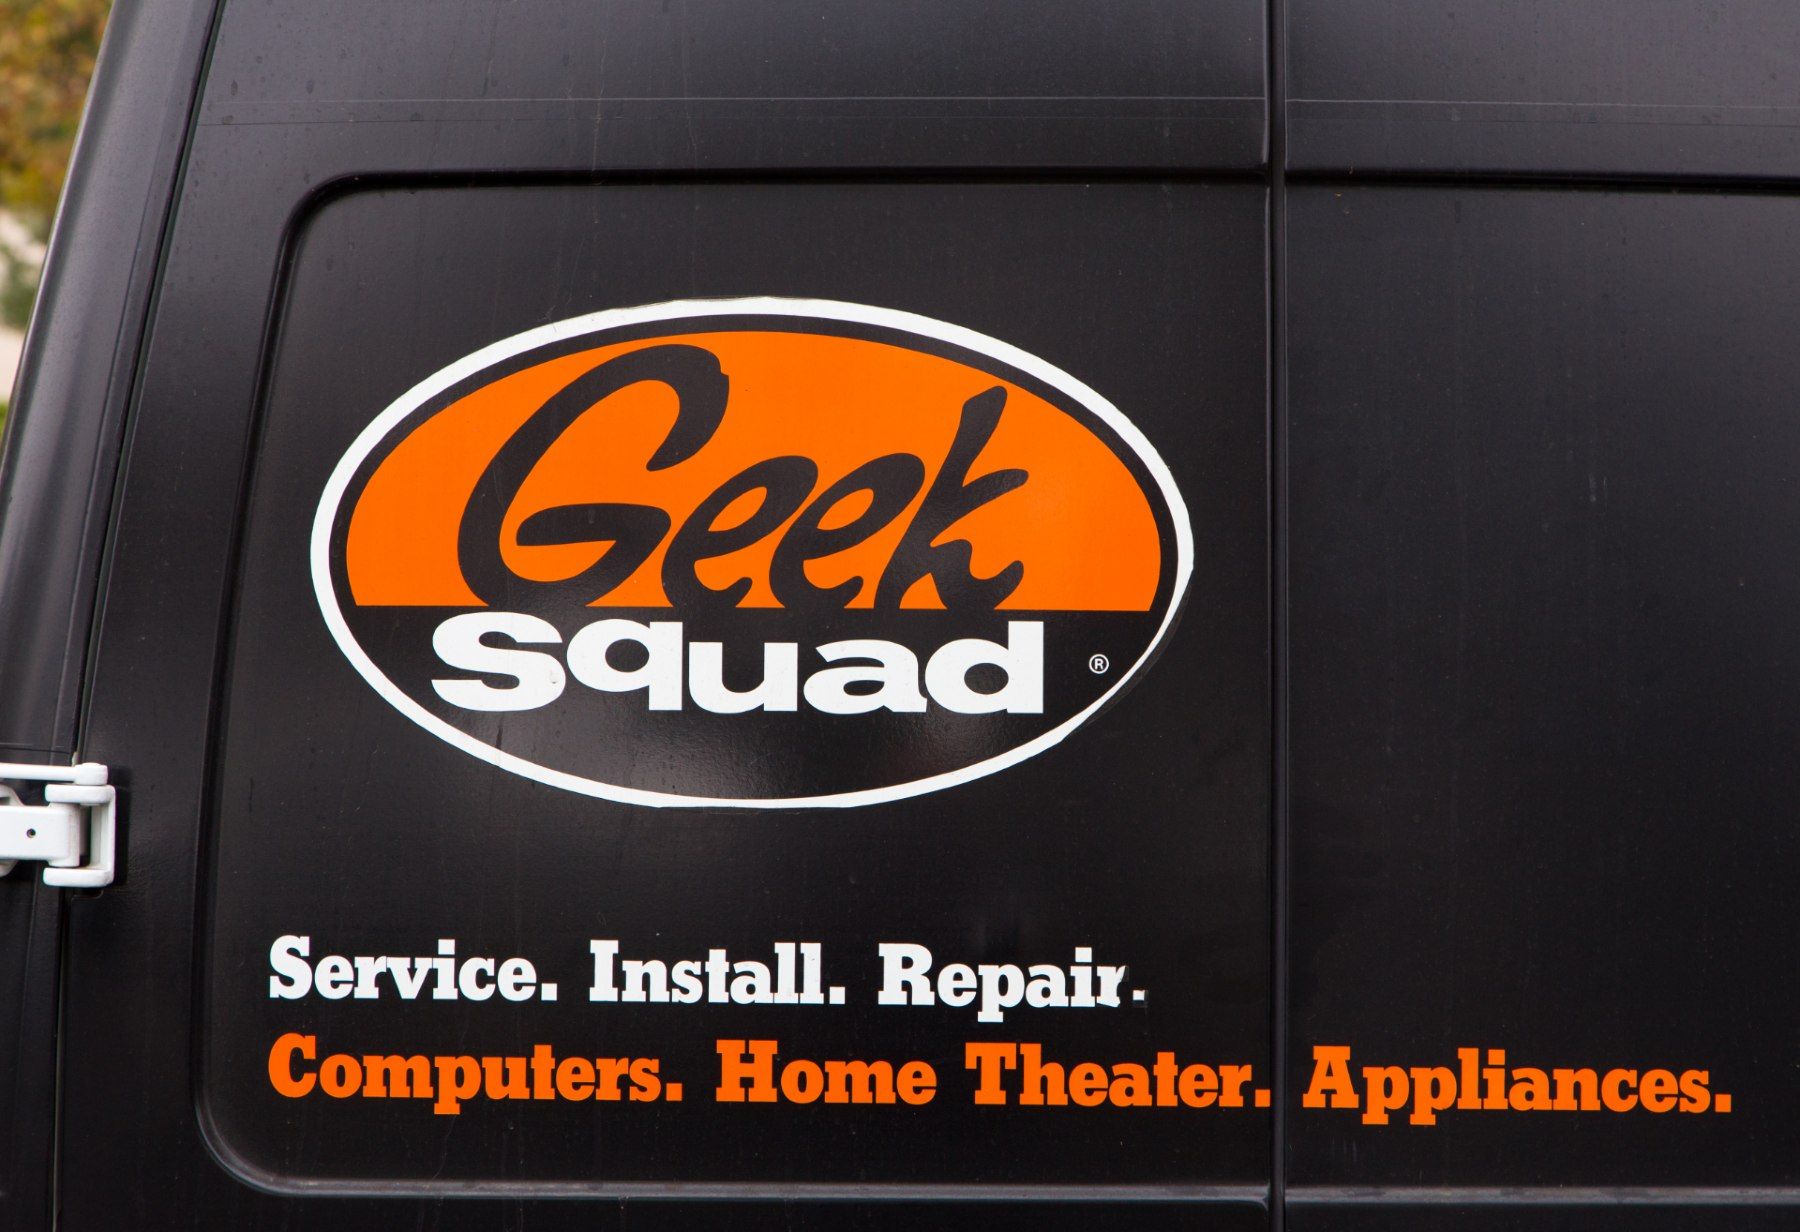 The back door of a black Geek Squad van - home security system installation